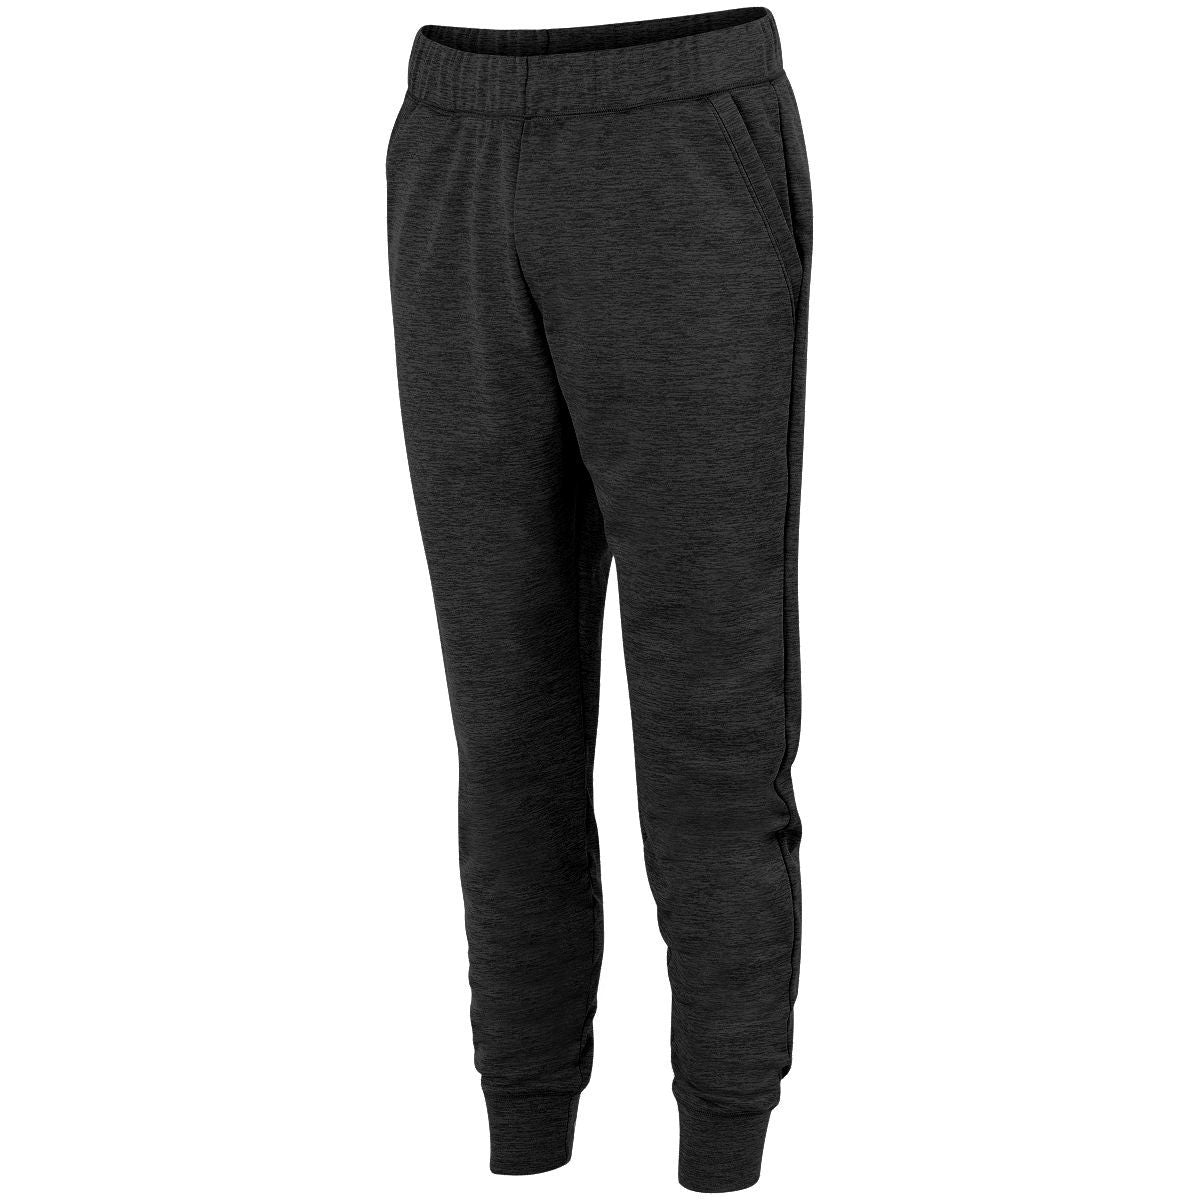 Augusta Sportswear Tonal Heather Fleece Jogger in Black  -Part of the Adult, Augusta-Products, Tonal-Fleece-Collection product lines at KanaleyCreations.com